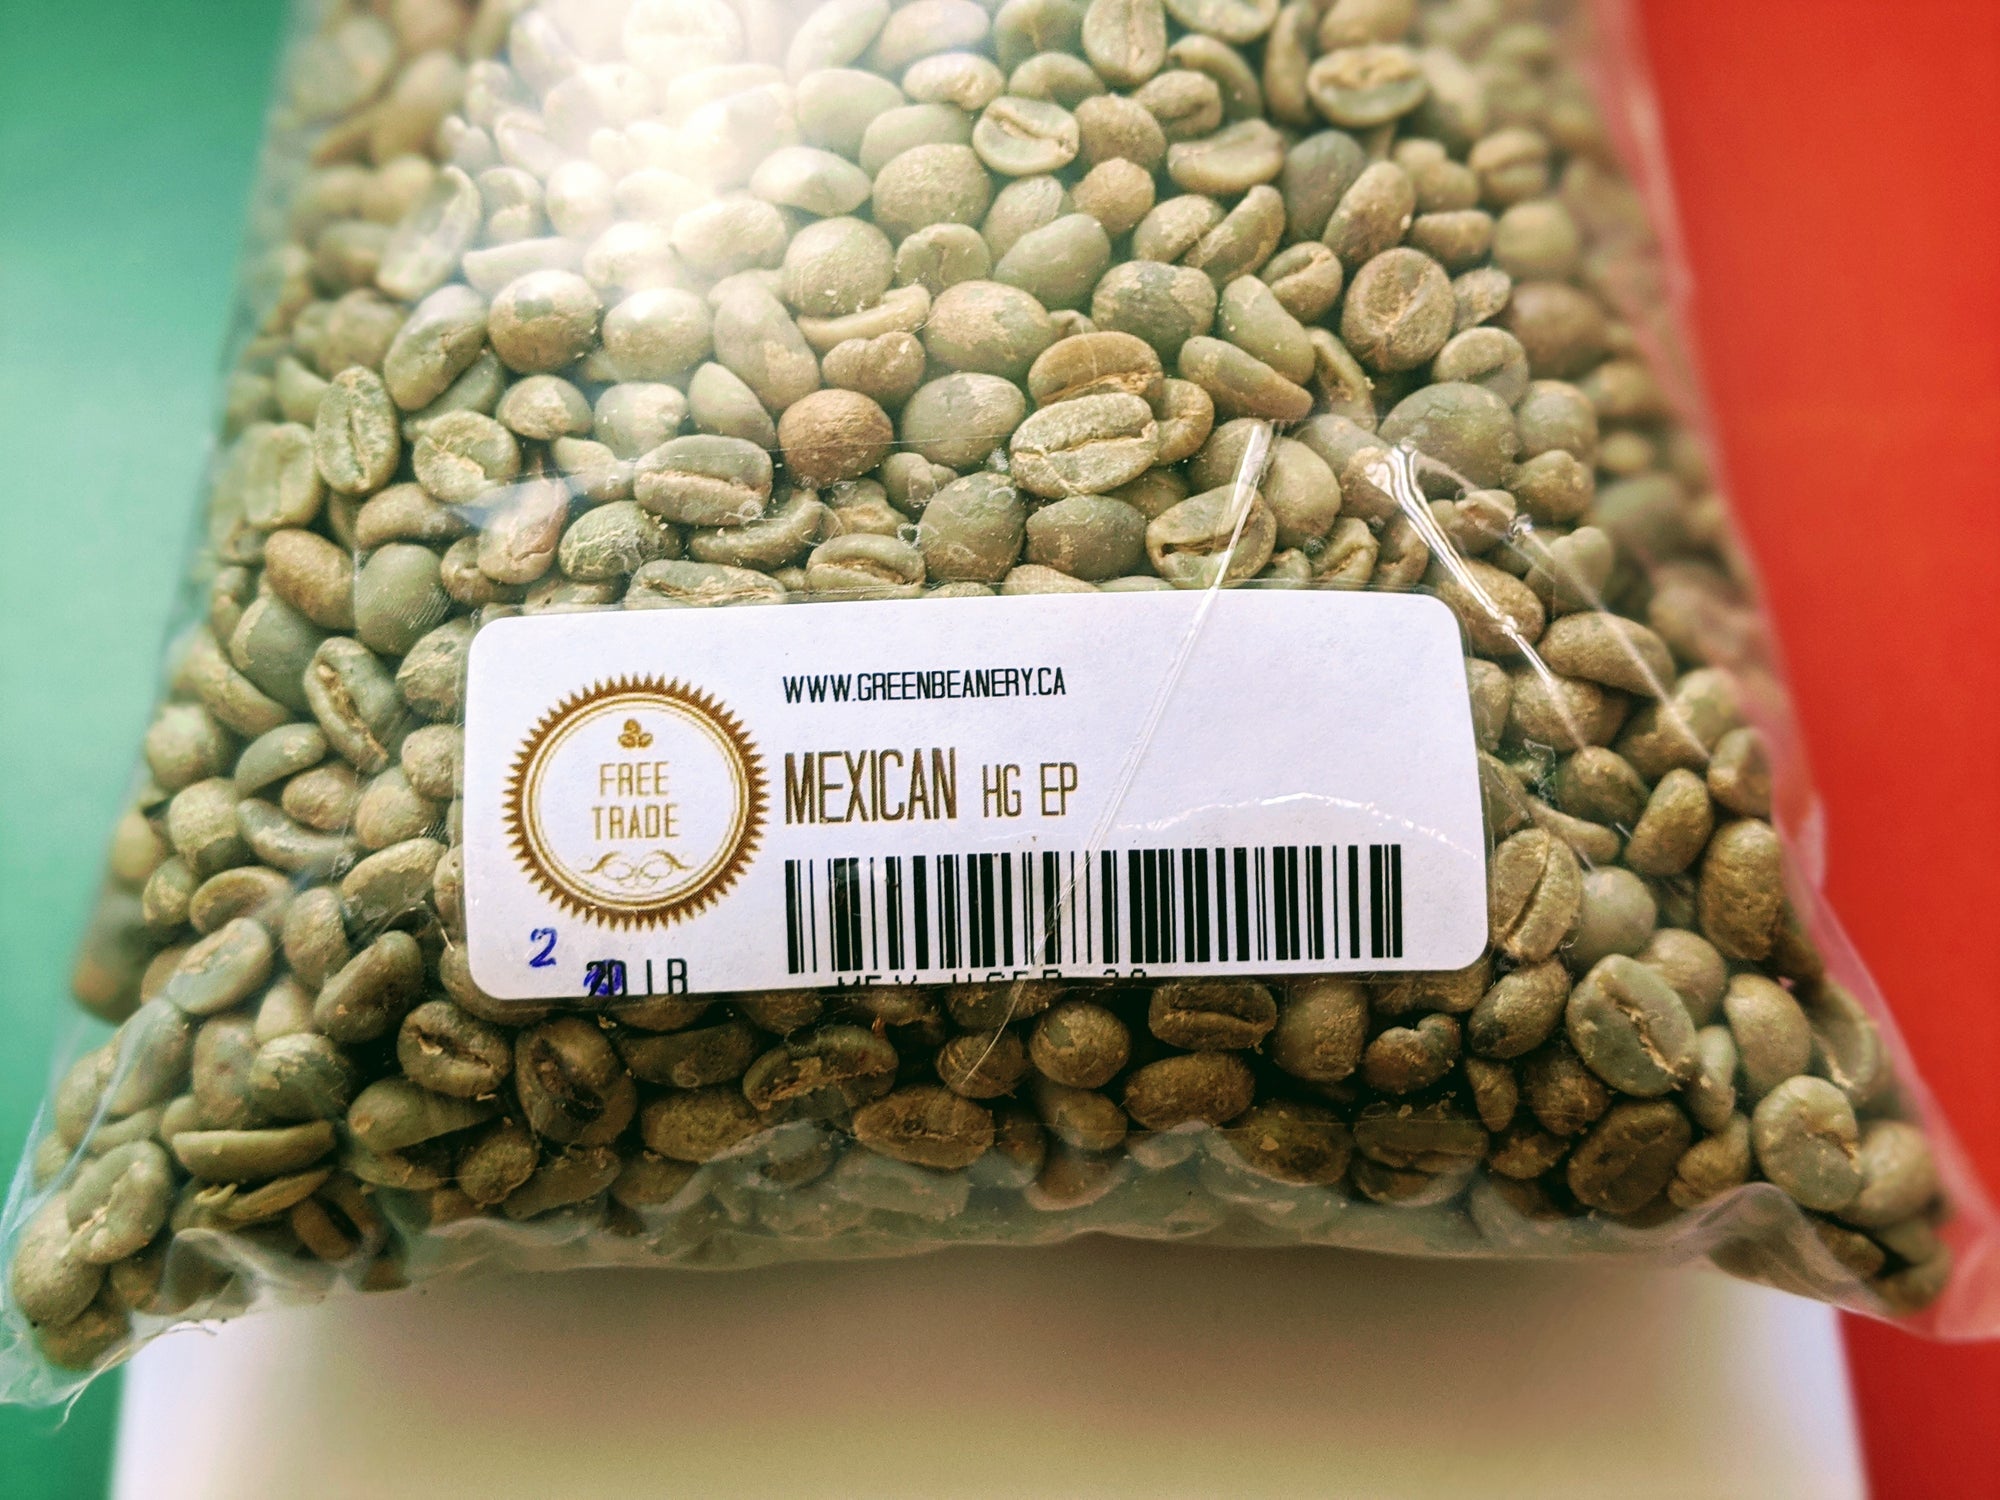 Unroasted - Mexican Chiapas HG EP (Coffee of the Week)